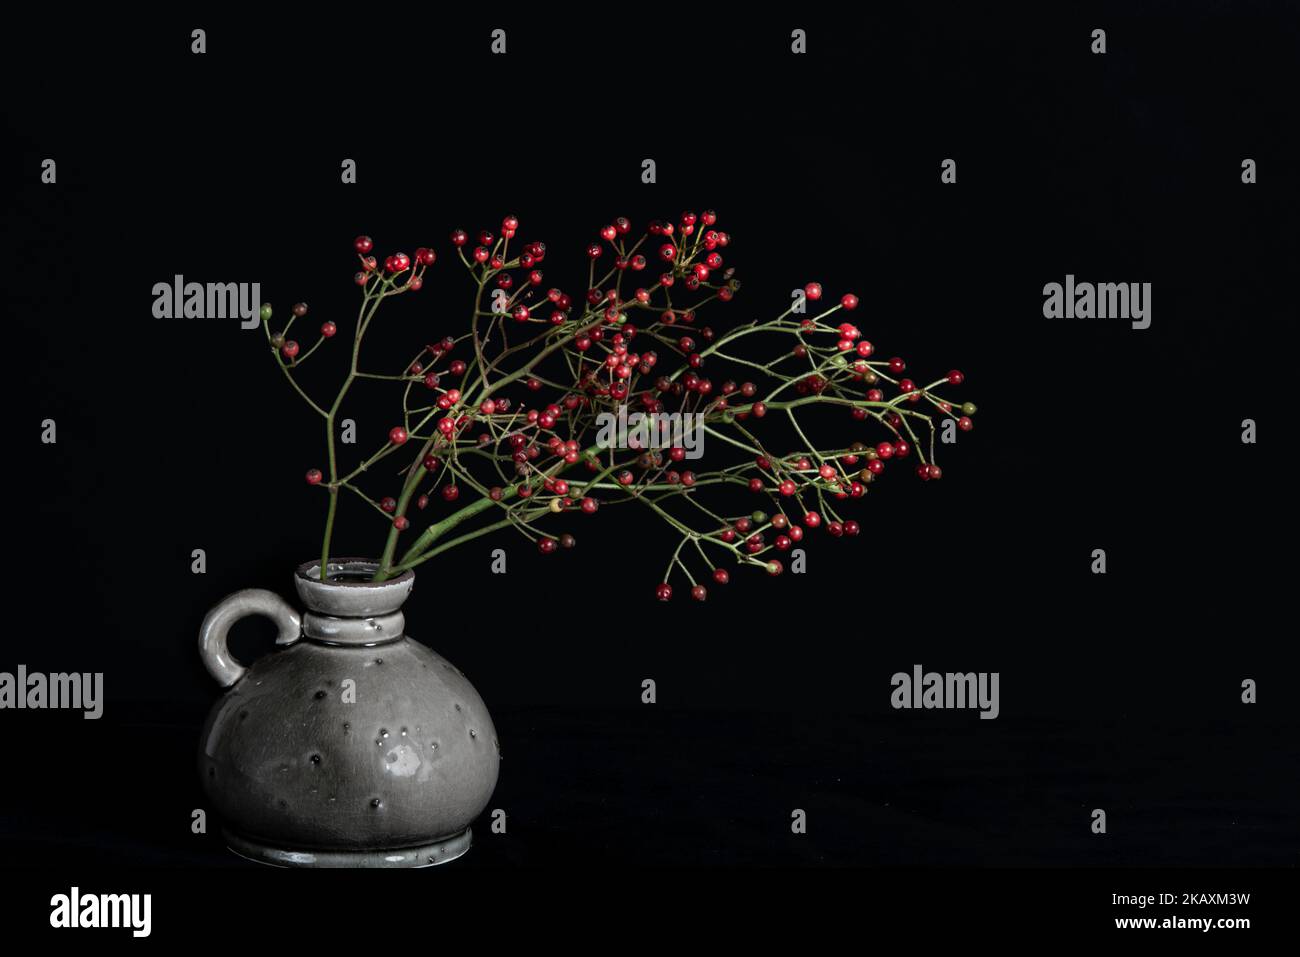 Bunch of red berries on the table in a grey vase.  Stock Photo